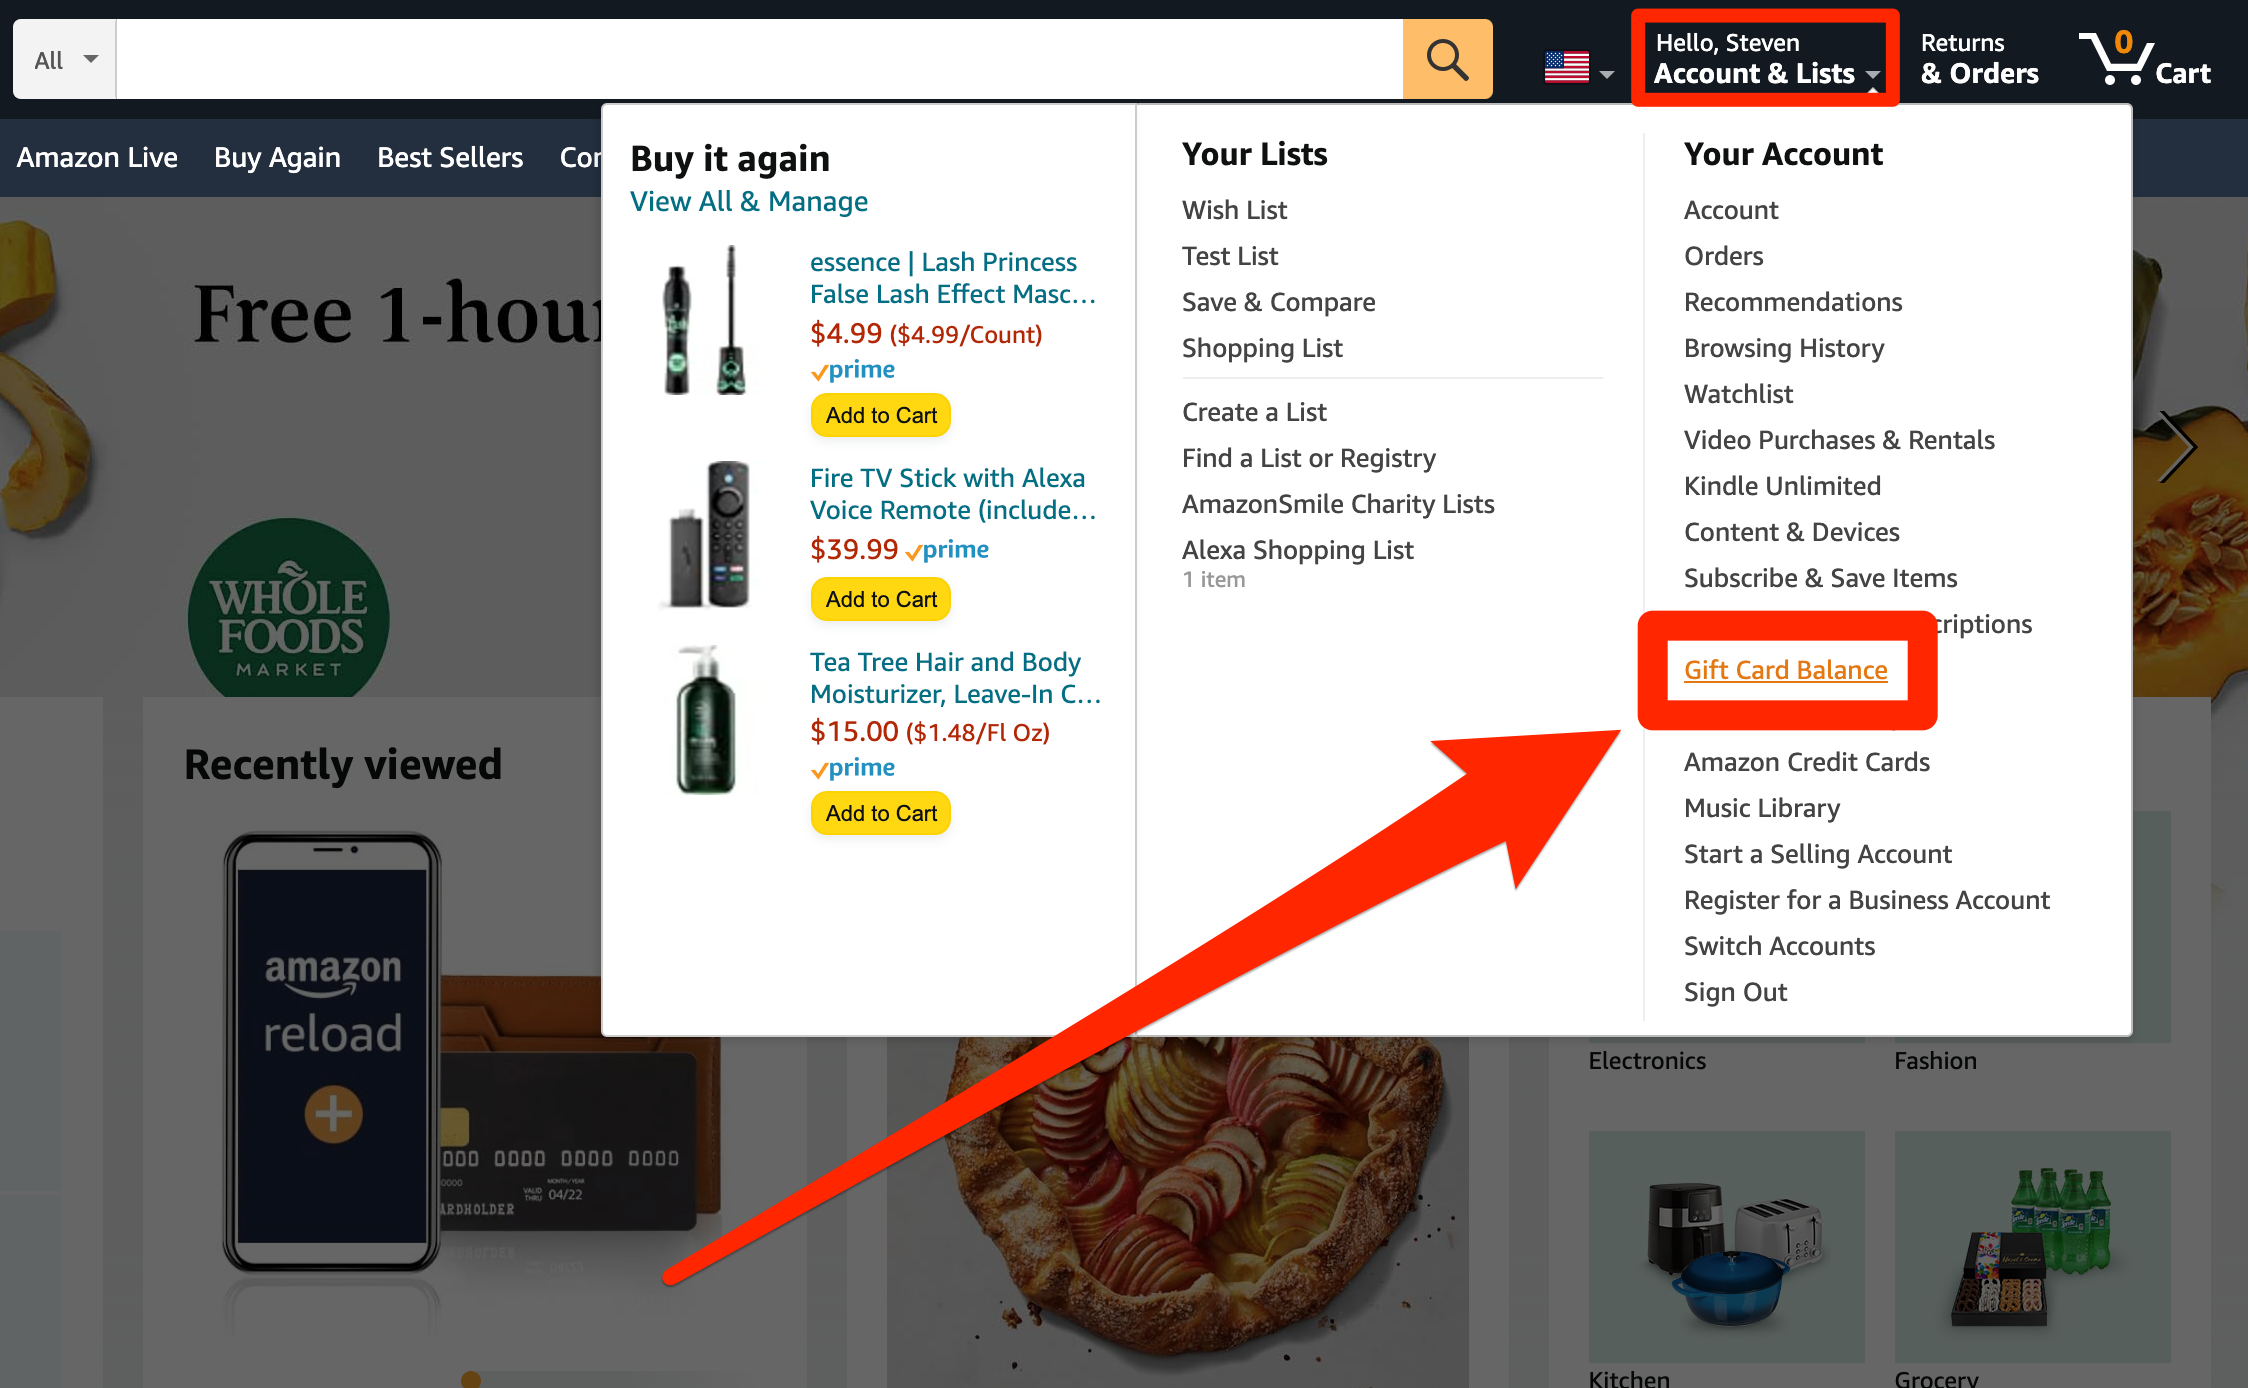 The Account and Lists menu on Amazon's website, with the "Gift Card Balance" option highlighted.